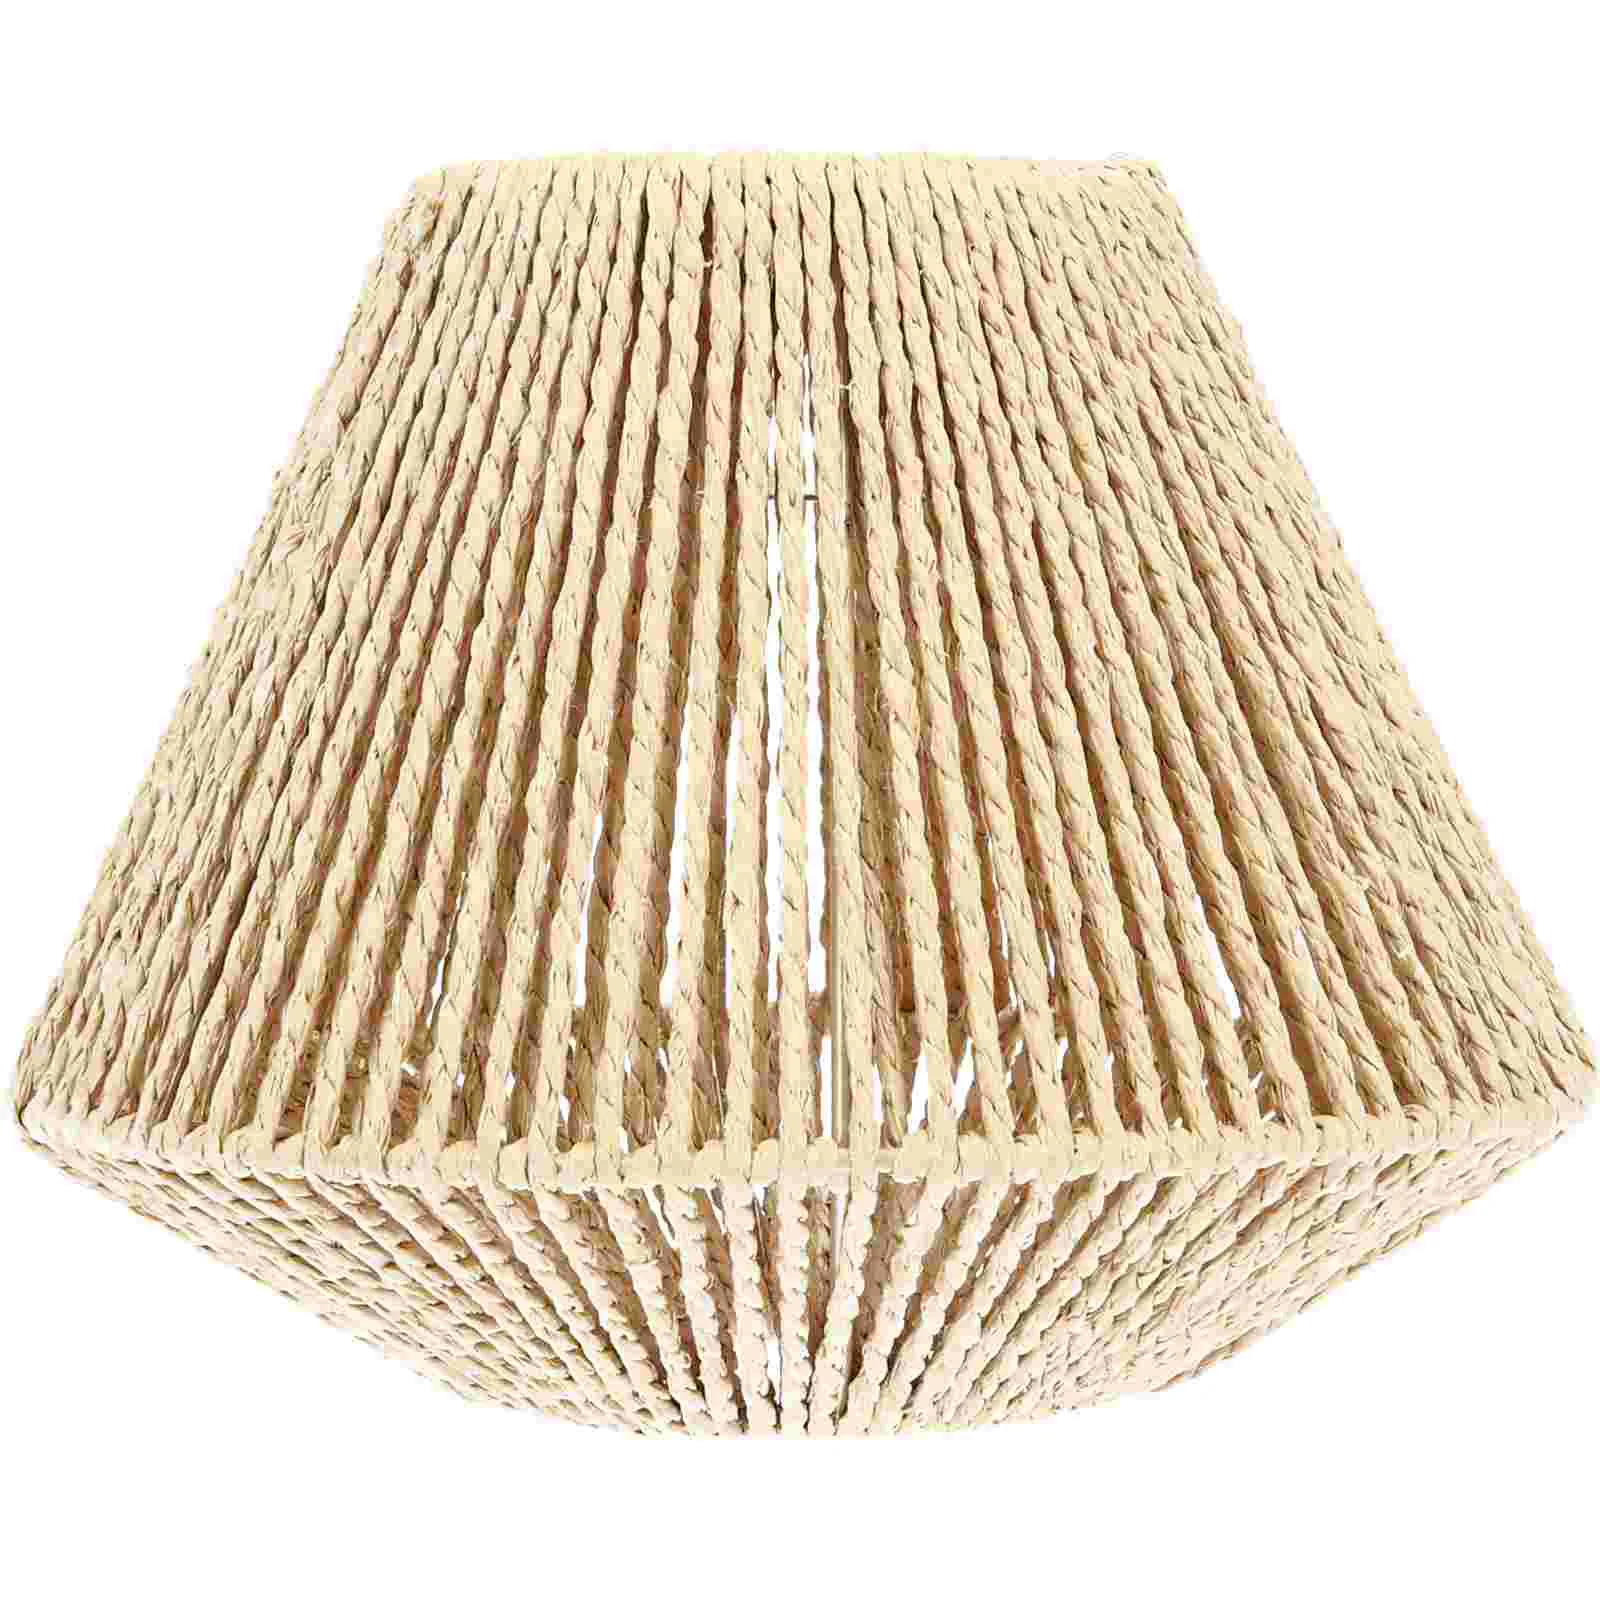 

Lamp Shade Woven Pendant Light Lampshade Shades Cover Rattan Hanging Chandelier Ceiling Rustic Wicker Lampshades Rain Wagon